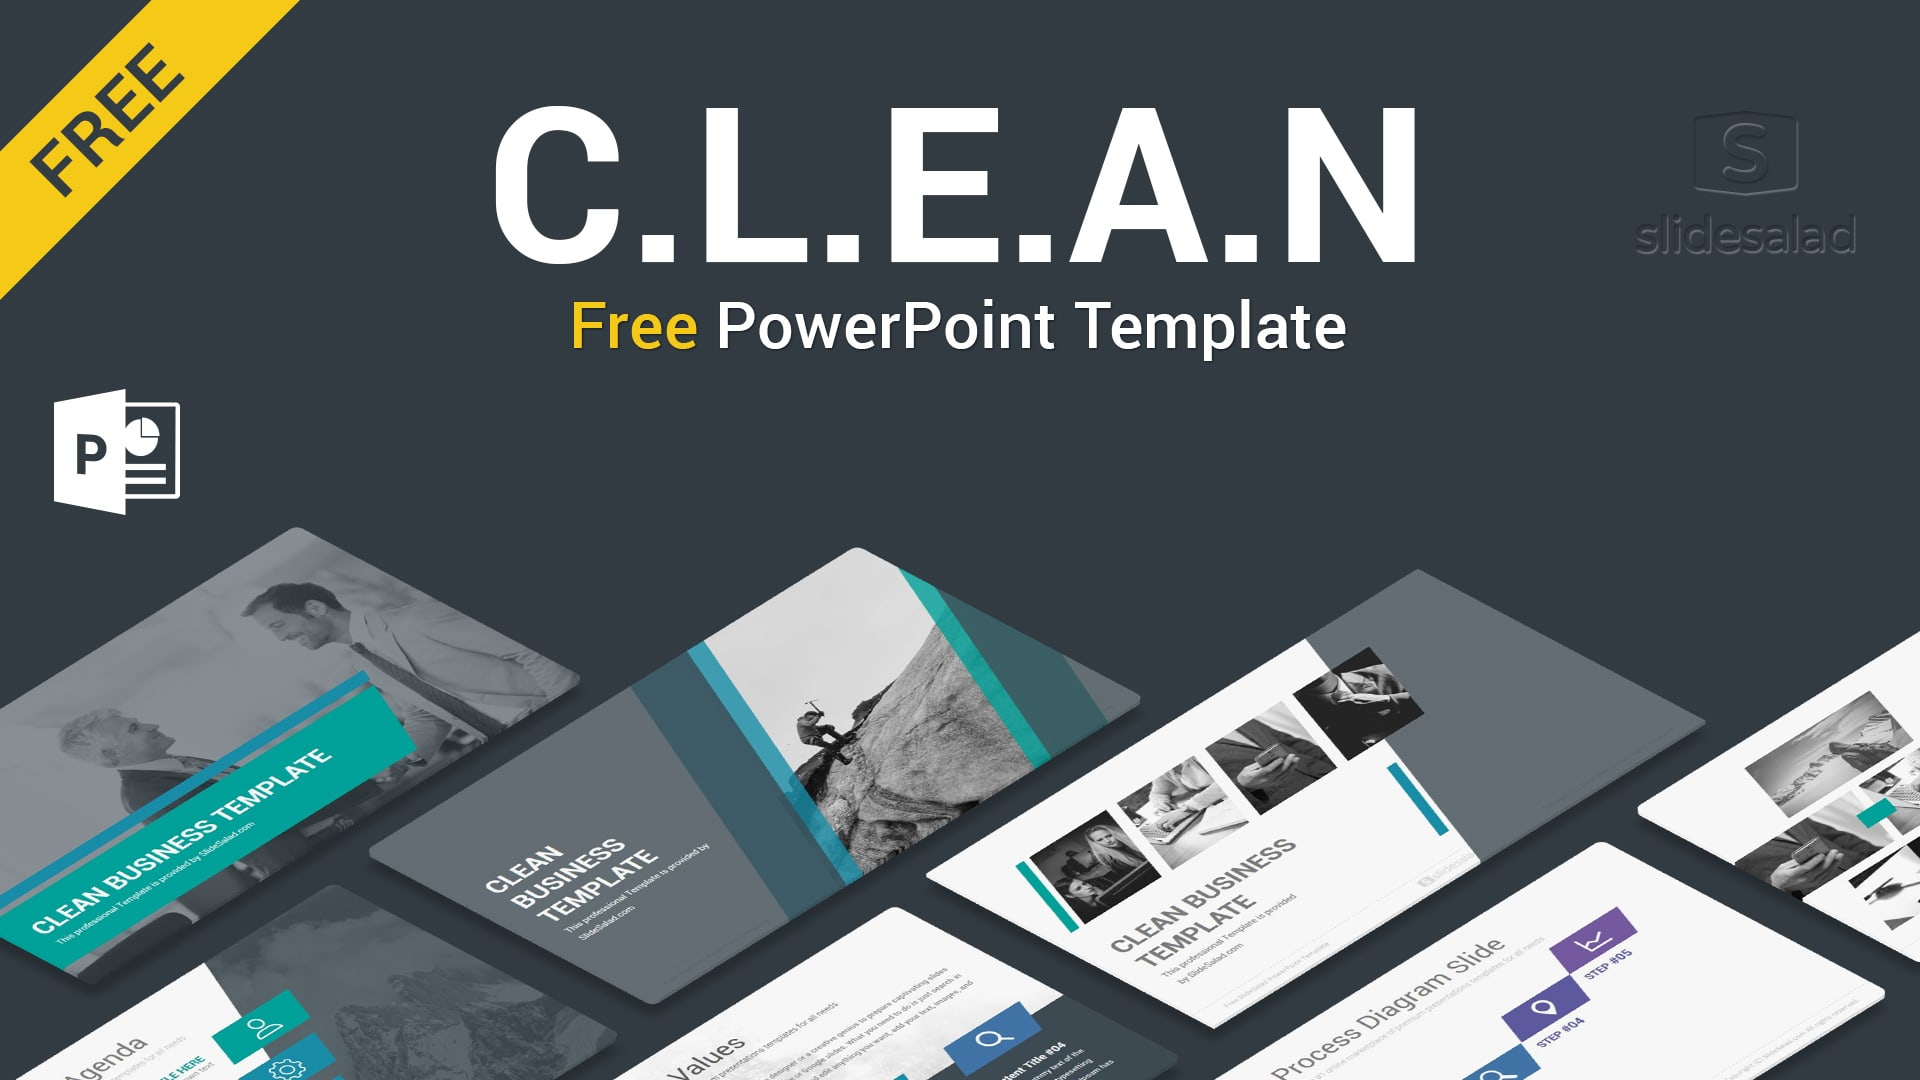 Best Free Presentation Templates Professional Designs 2019 For Powerpoint Sample Templates Free Download